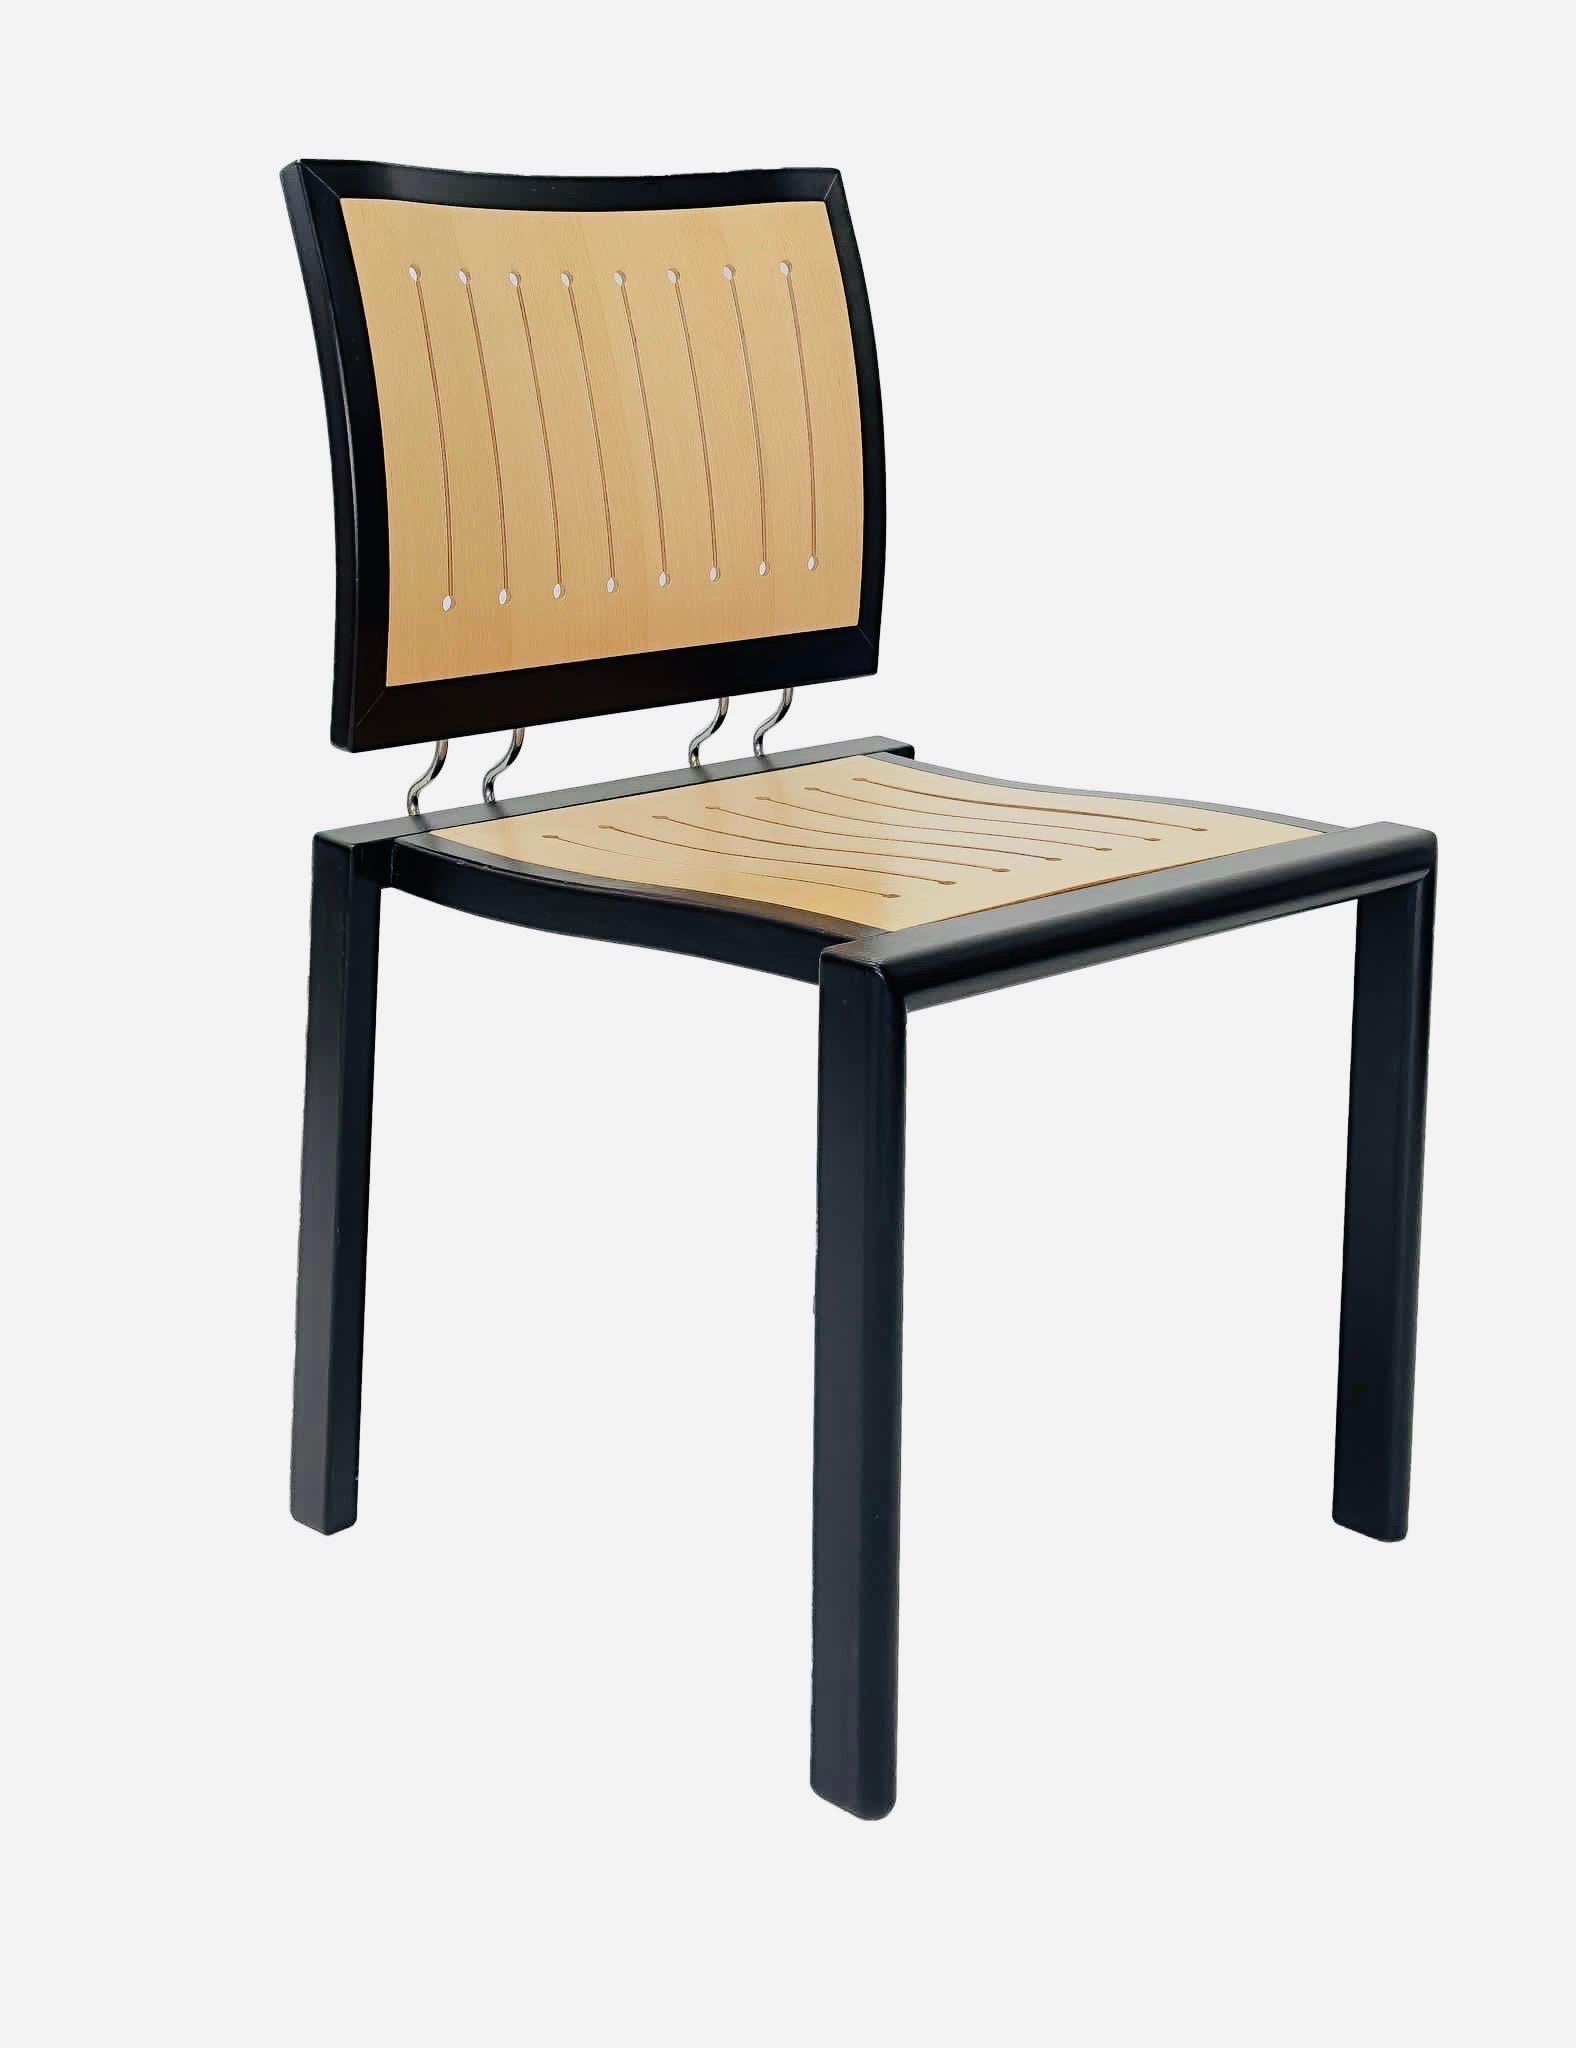 Designed in 1989 by Swiss most renowned designer Bruno Rey in collaborator with Charles Polin, this classic chair has its timeless characteristic from its square lines , and it’s finely chiseled back and it’s fine connection between the back and the